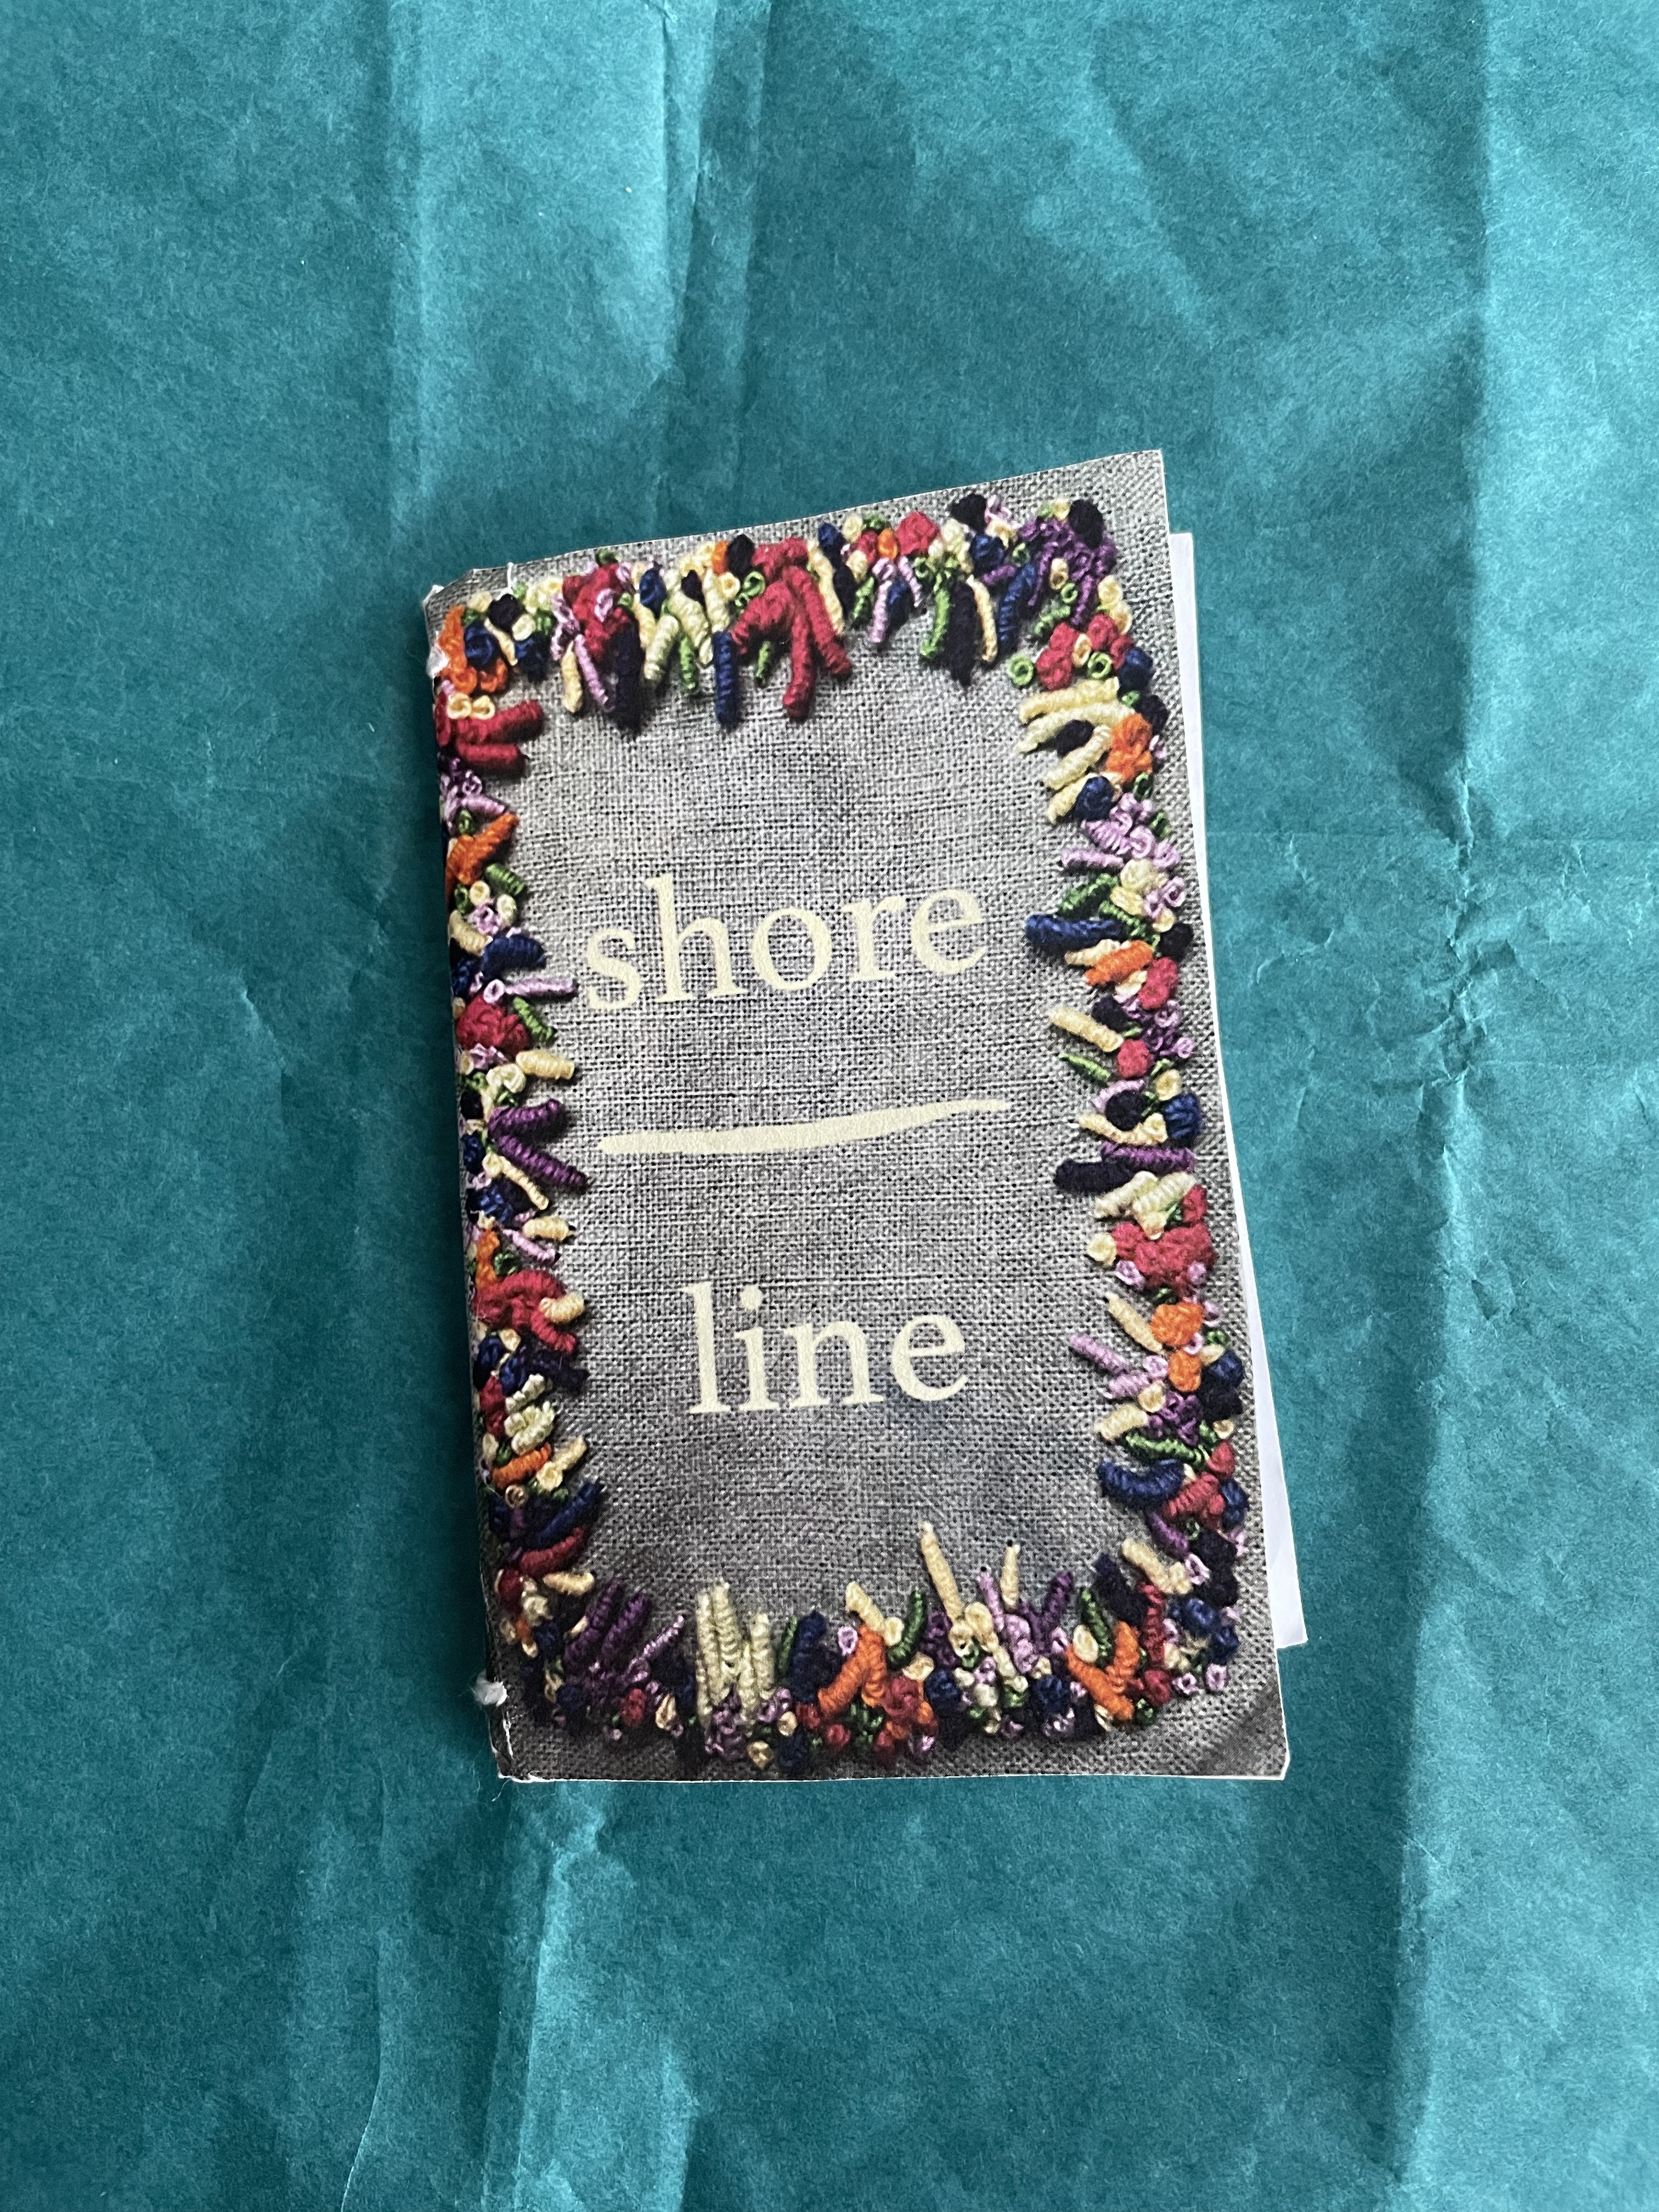 a poetry zine featuring coral embroidered on the cover